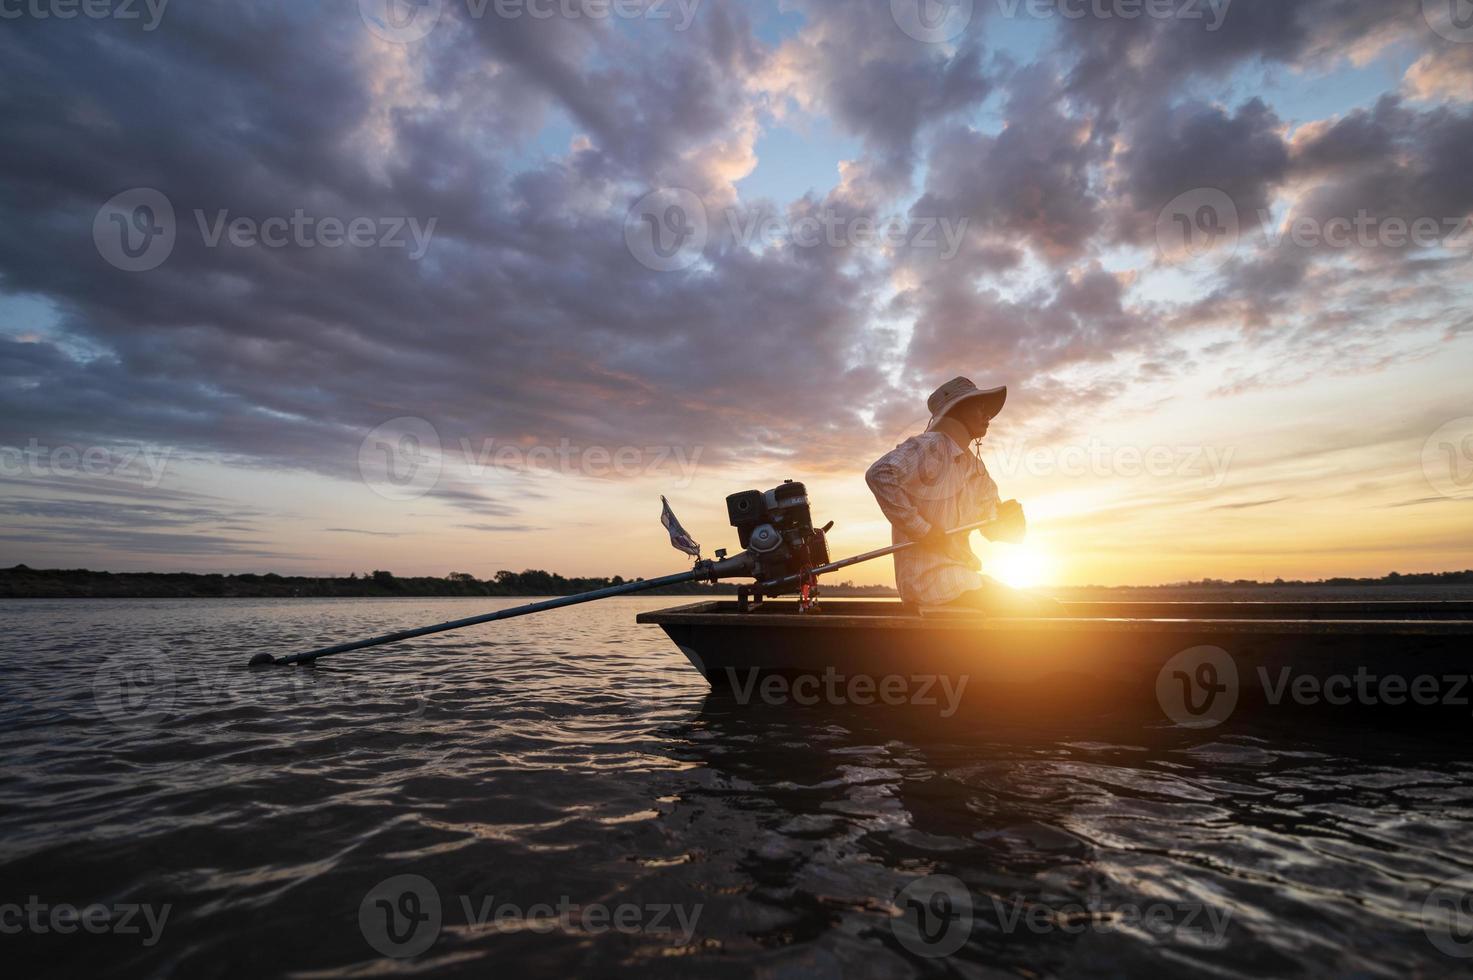 Shadow fishermen drive motorized boats with nets out to catch fish on the rivers of Thailand, Asia Fishing. photo